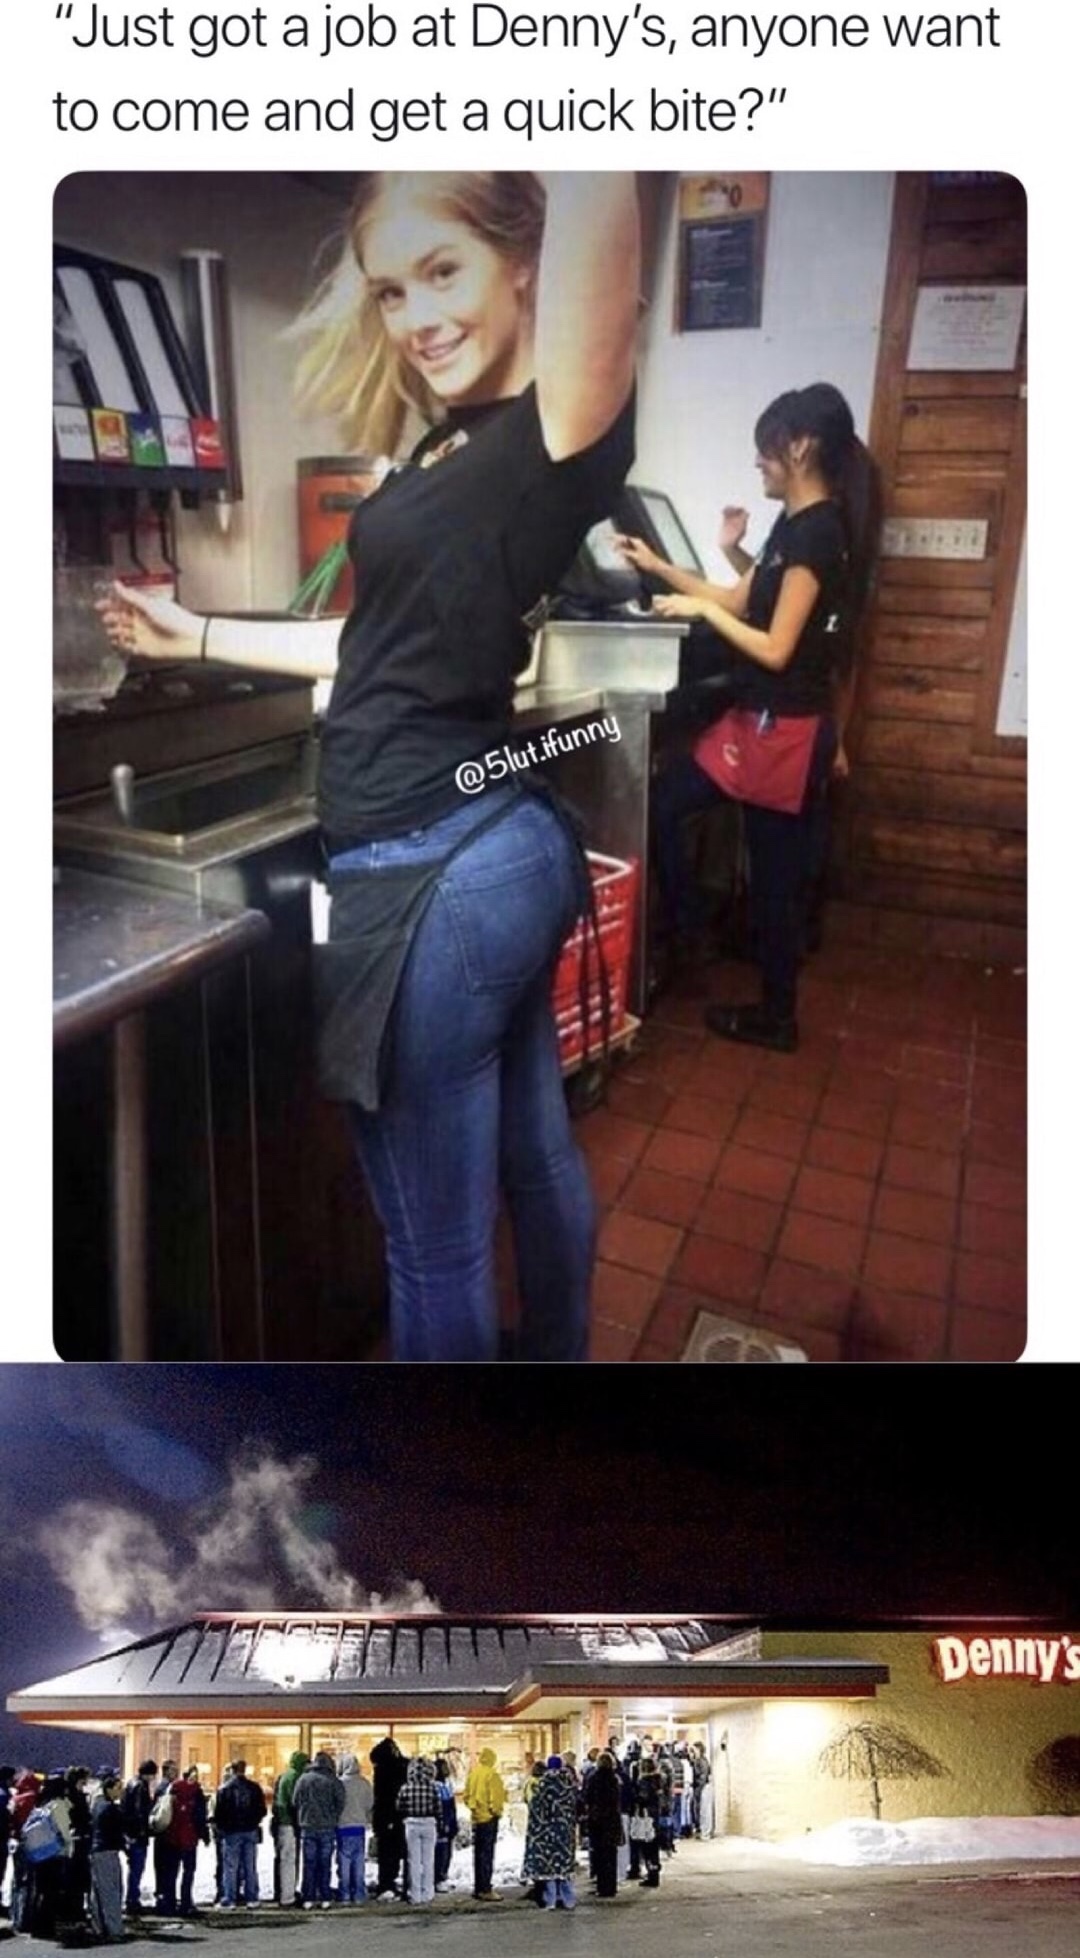 meme jeans - "Just got a job at Denny's, anyone want to come and get a quick bite?" Slut.fr Denny's